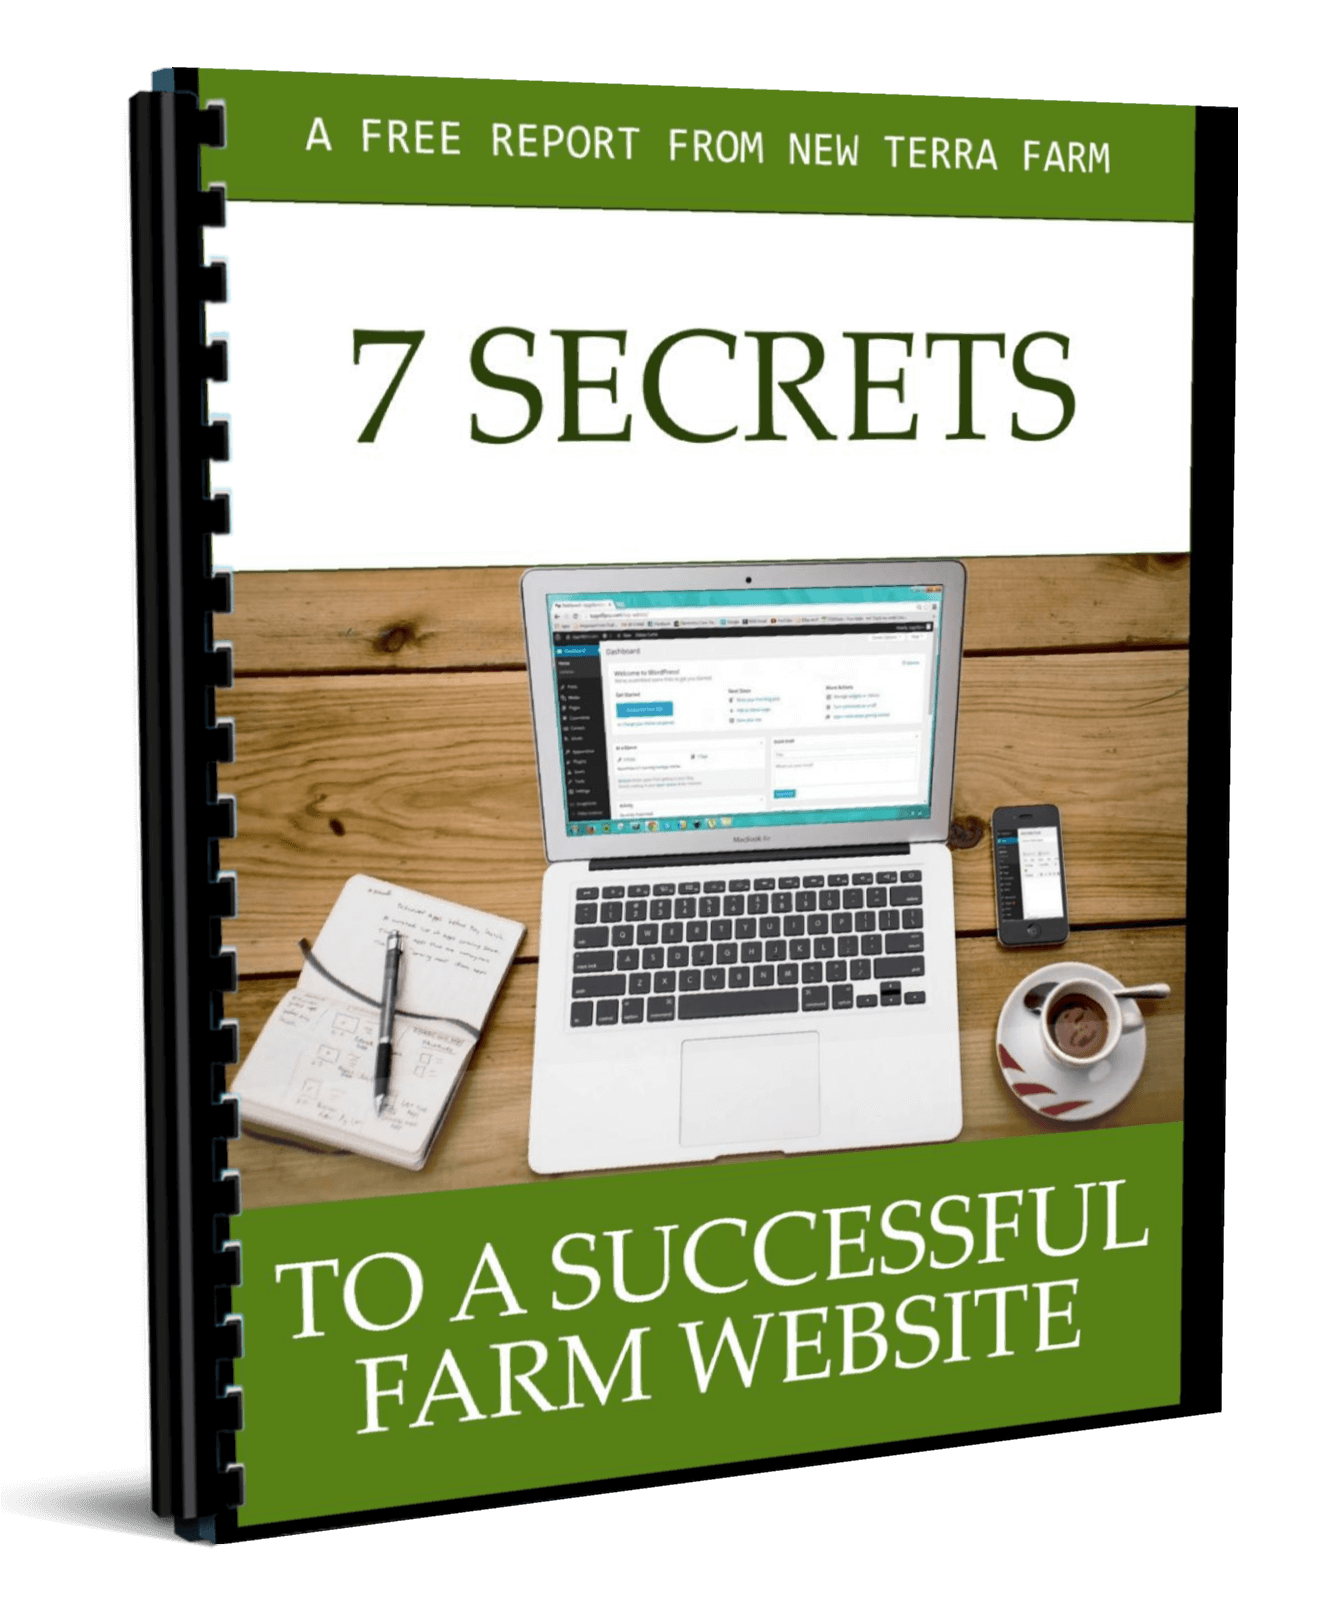 How did two simple farmer/poets grow a cool web site? Find out here!